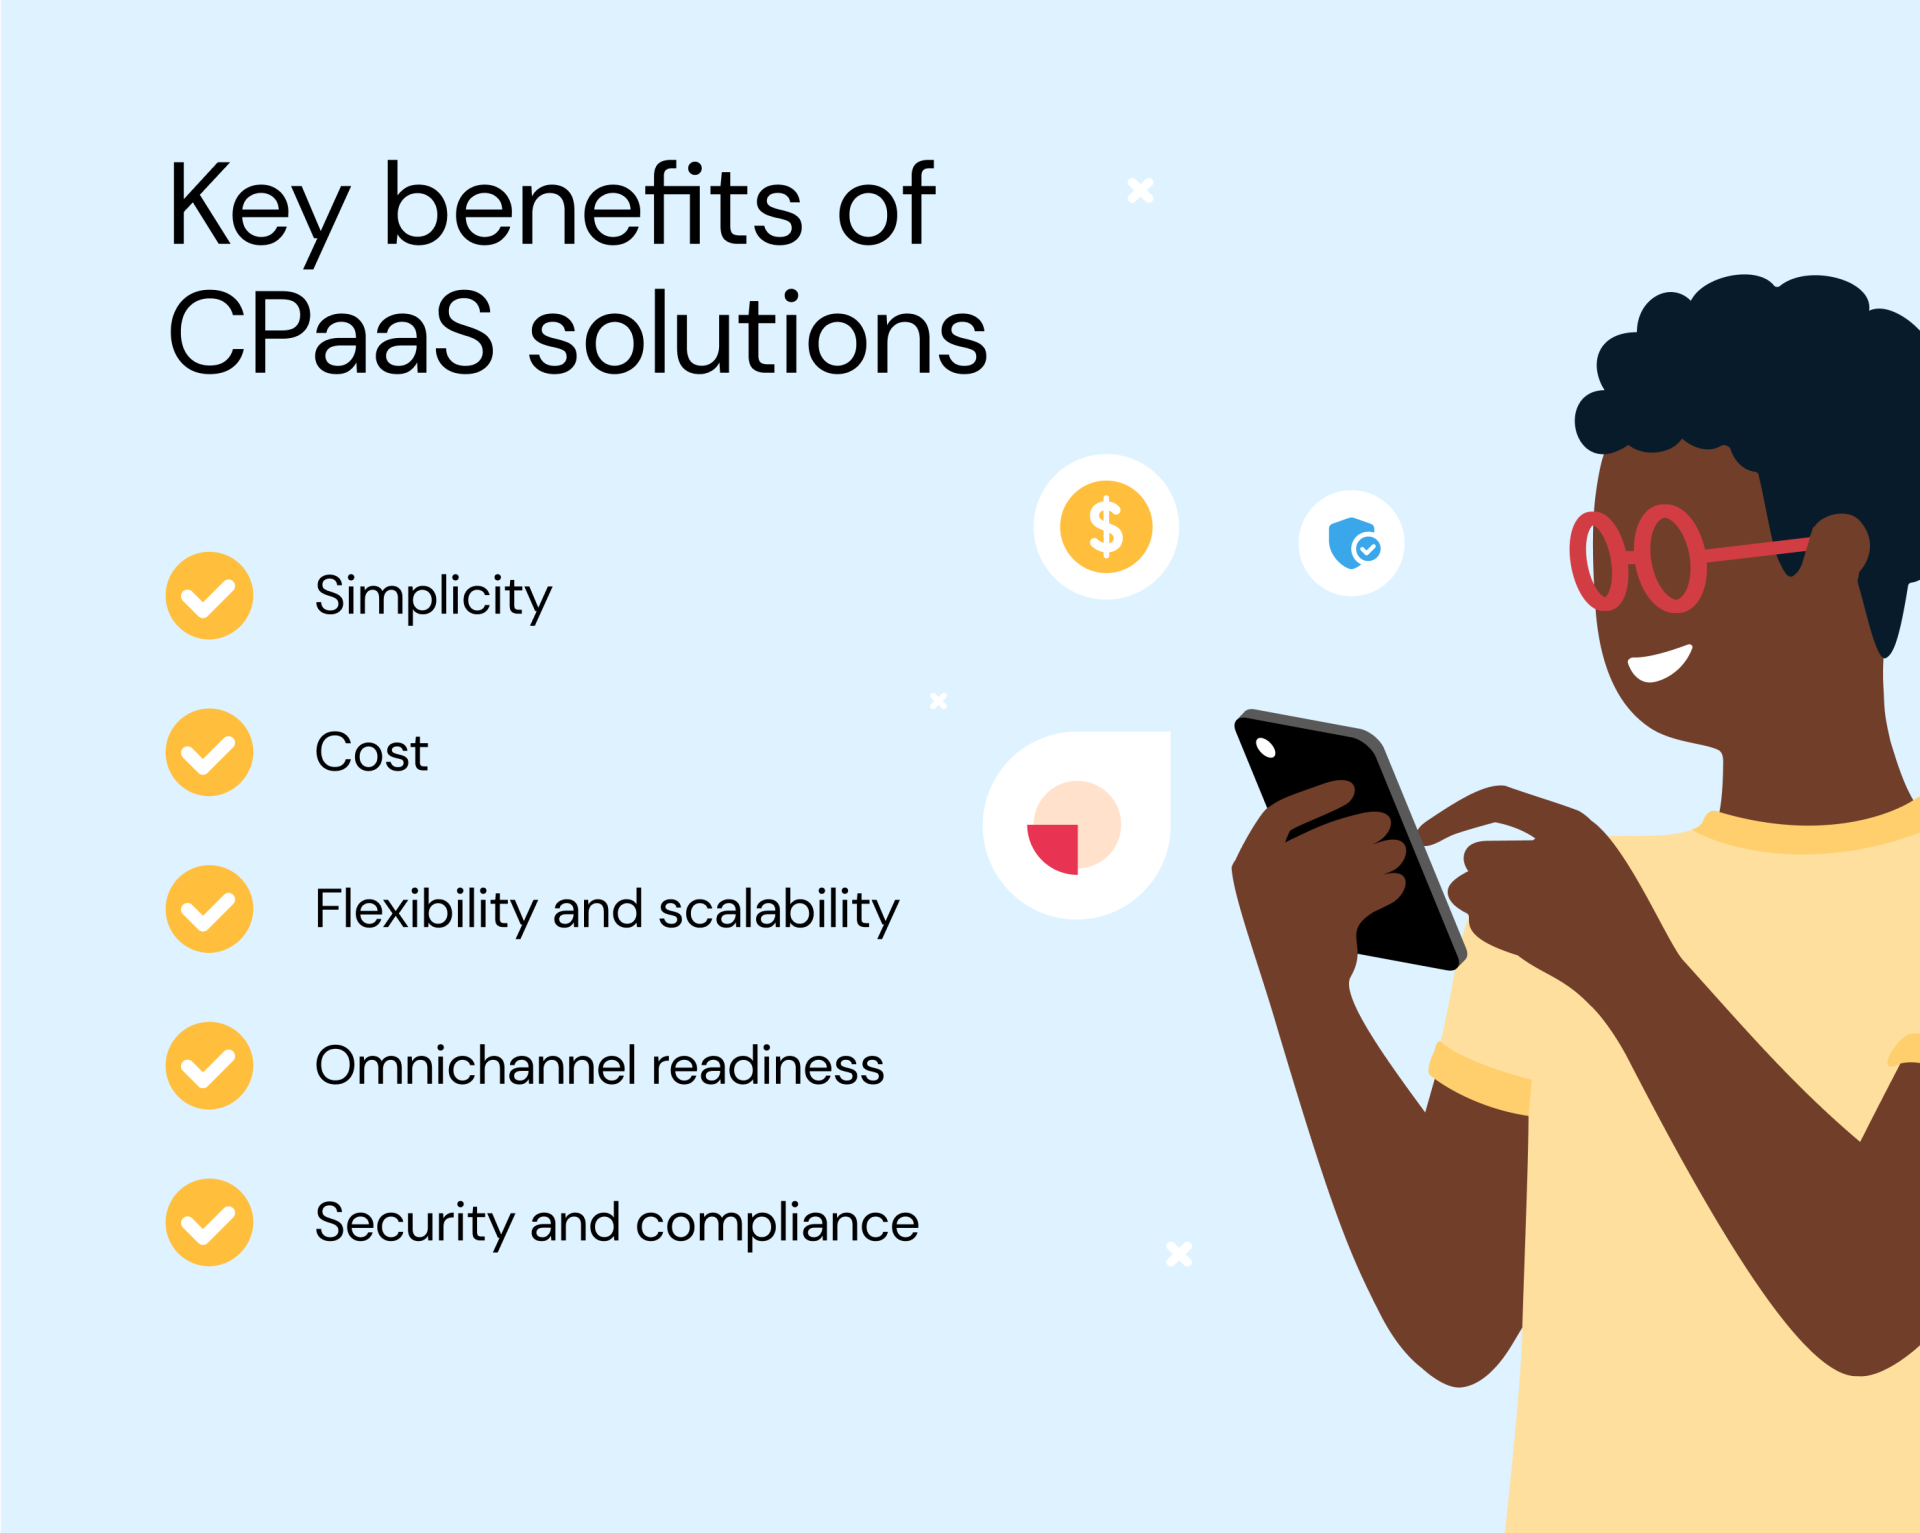 Benefits of CPaaS solutions